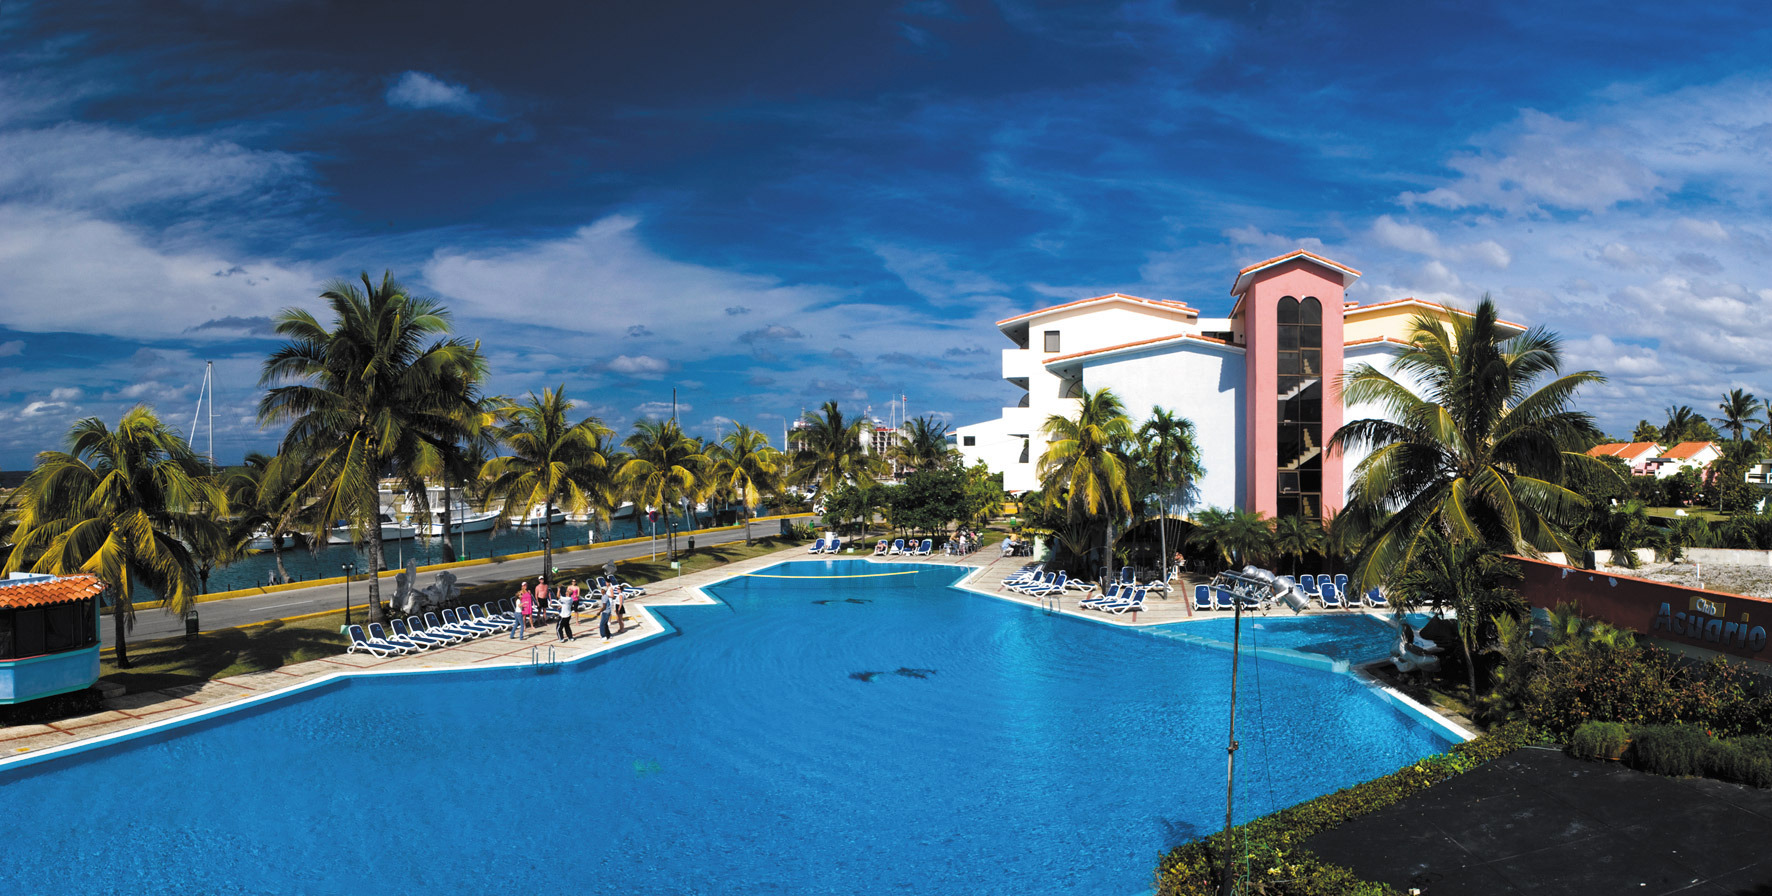 CLUB ACUARIO: Book at the best price